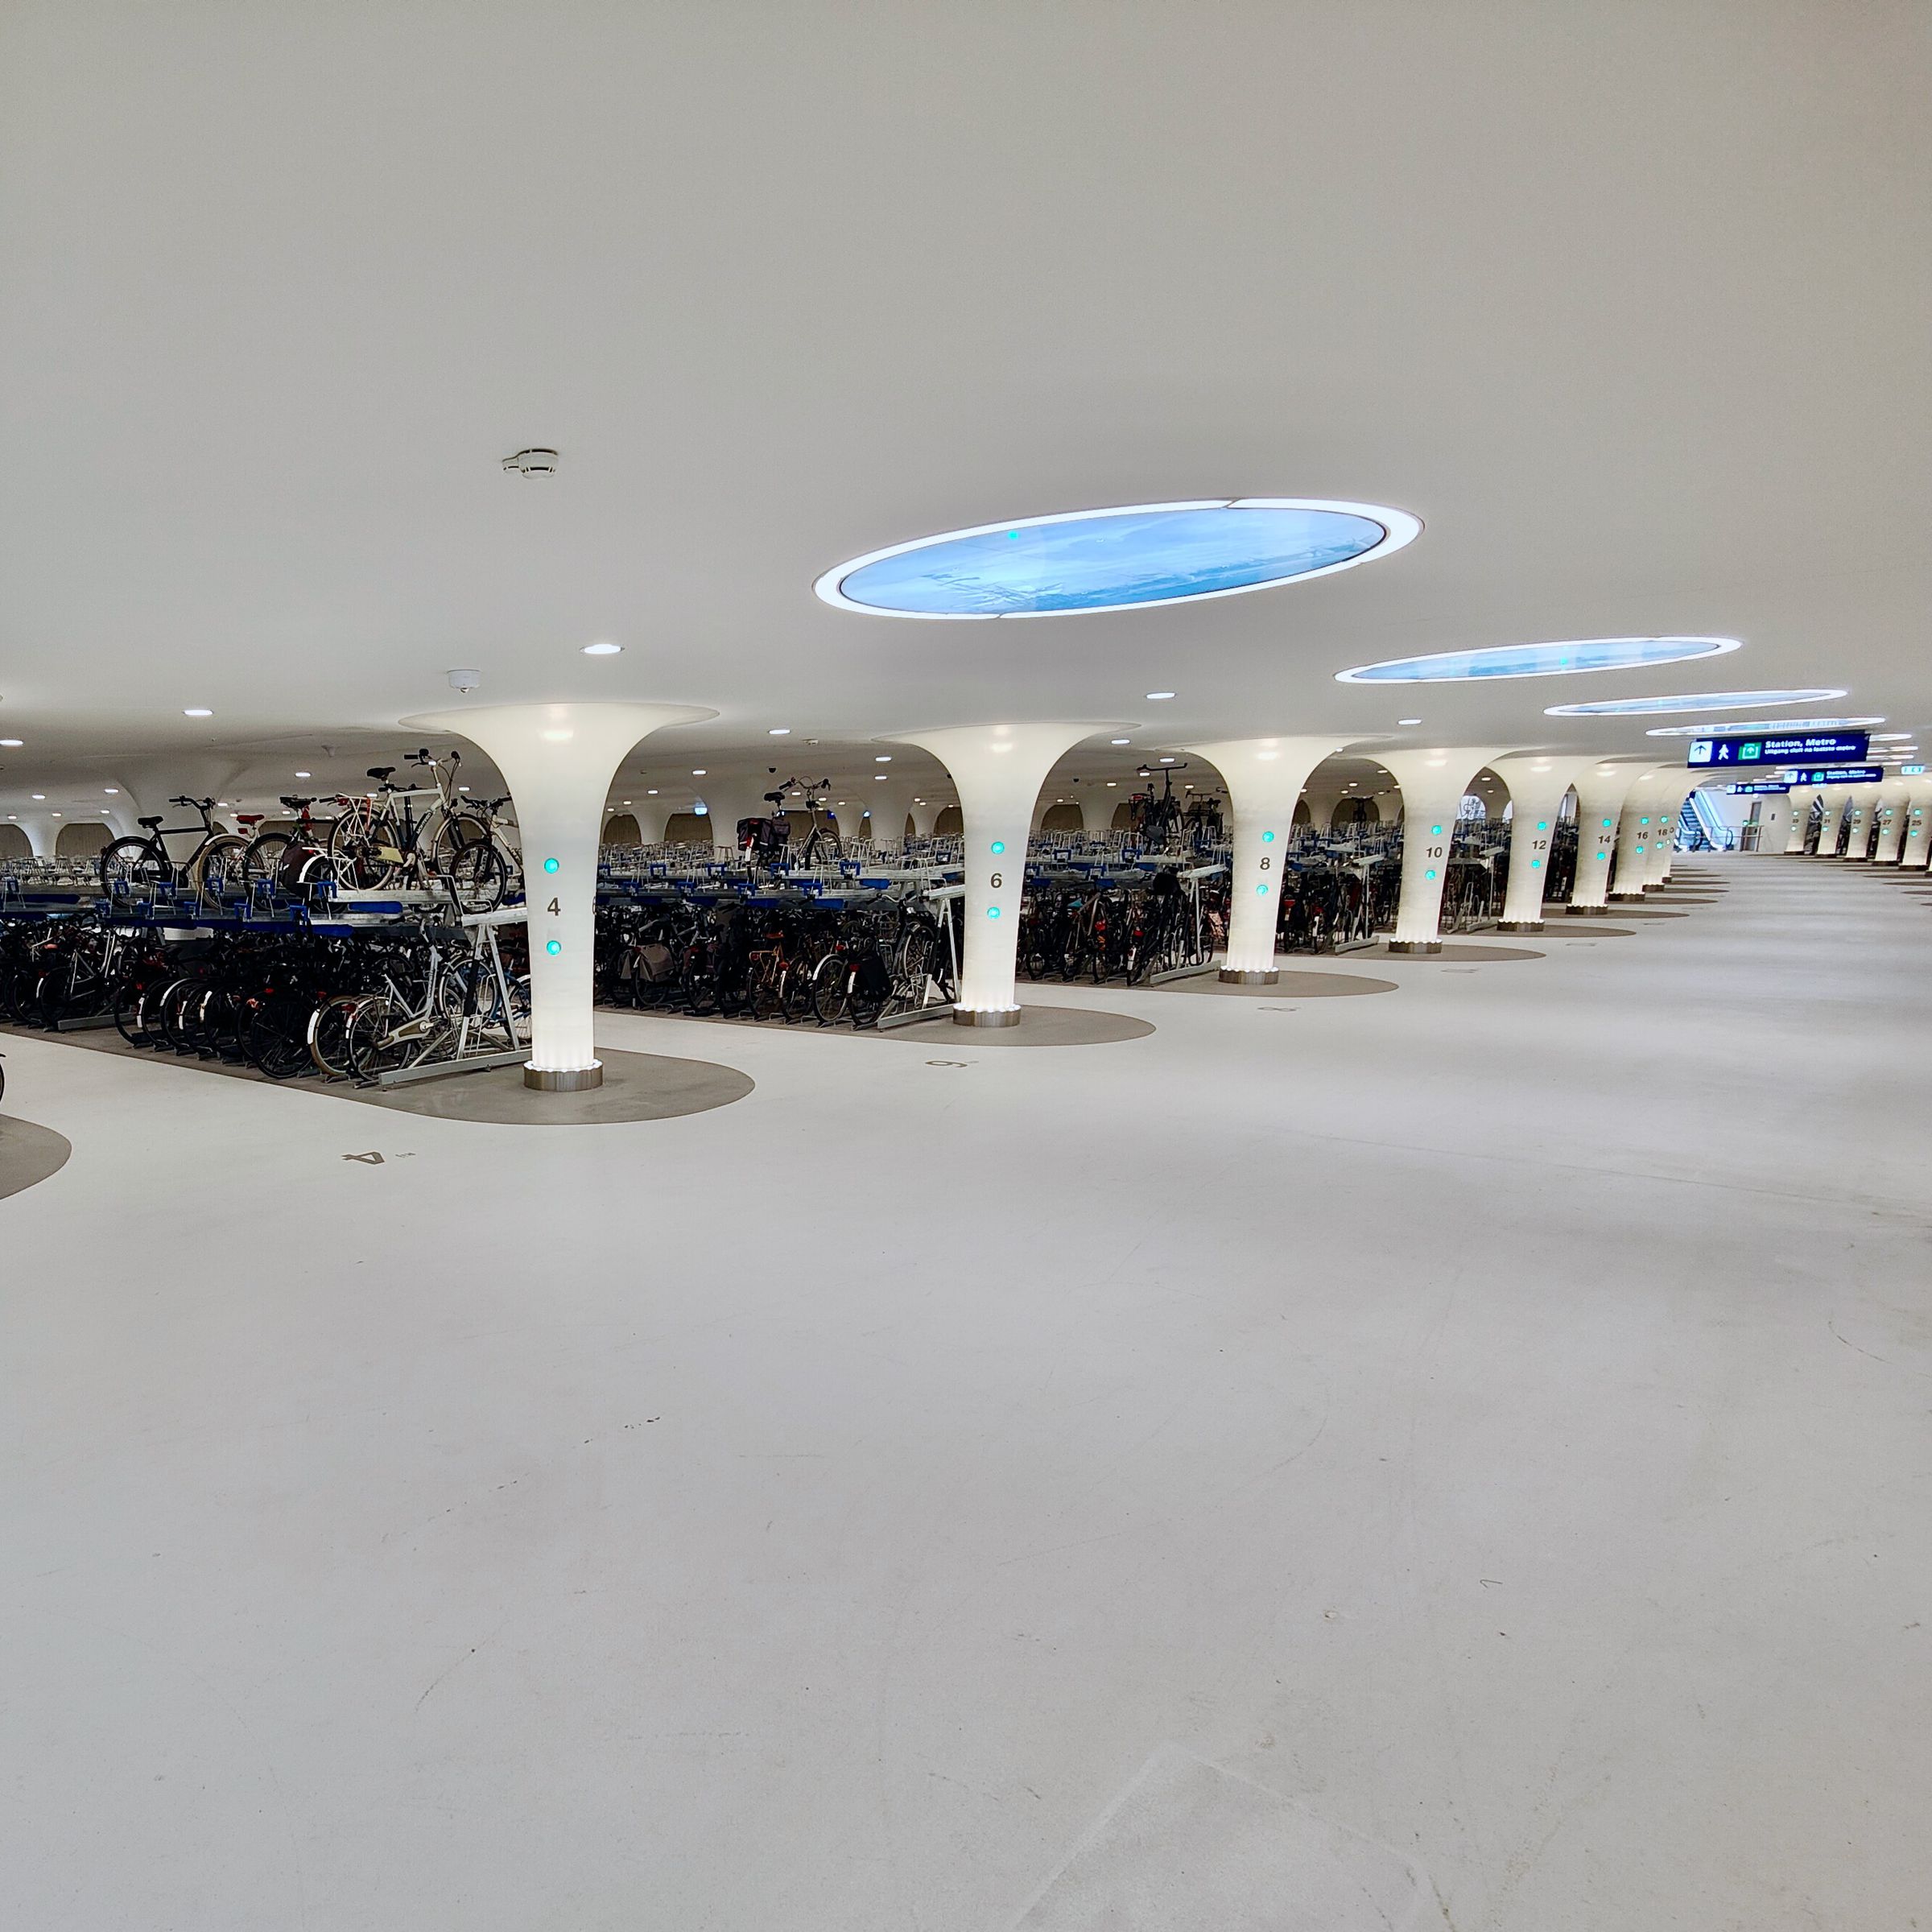 A photo showing a surprisingly spacious and futuristic parking garage of all white. Long rows of two-story bike racks extend to the edge of the room as tall white columns rise from the white floor to the white ceiling dotted with circular “windows” showing what looks like blue water (but are actually etched glass).